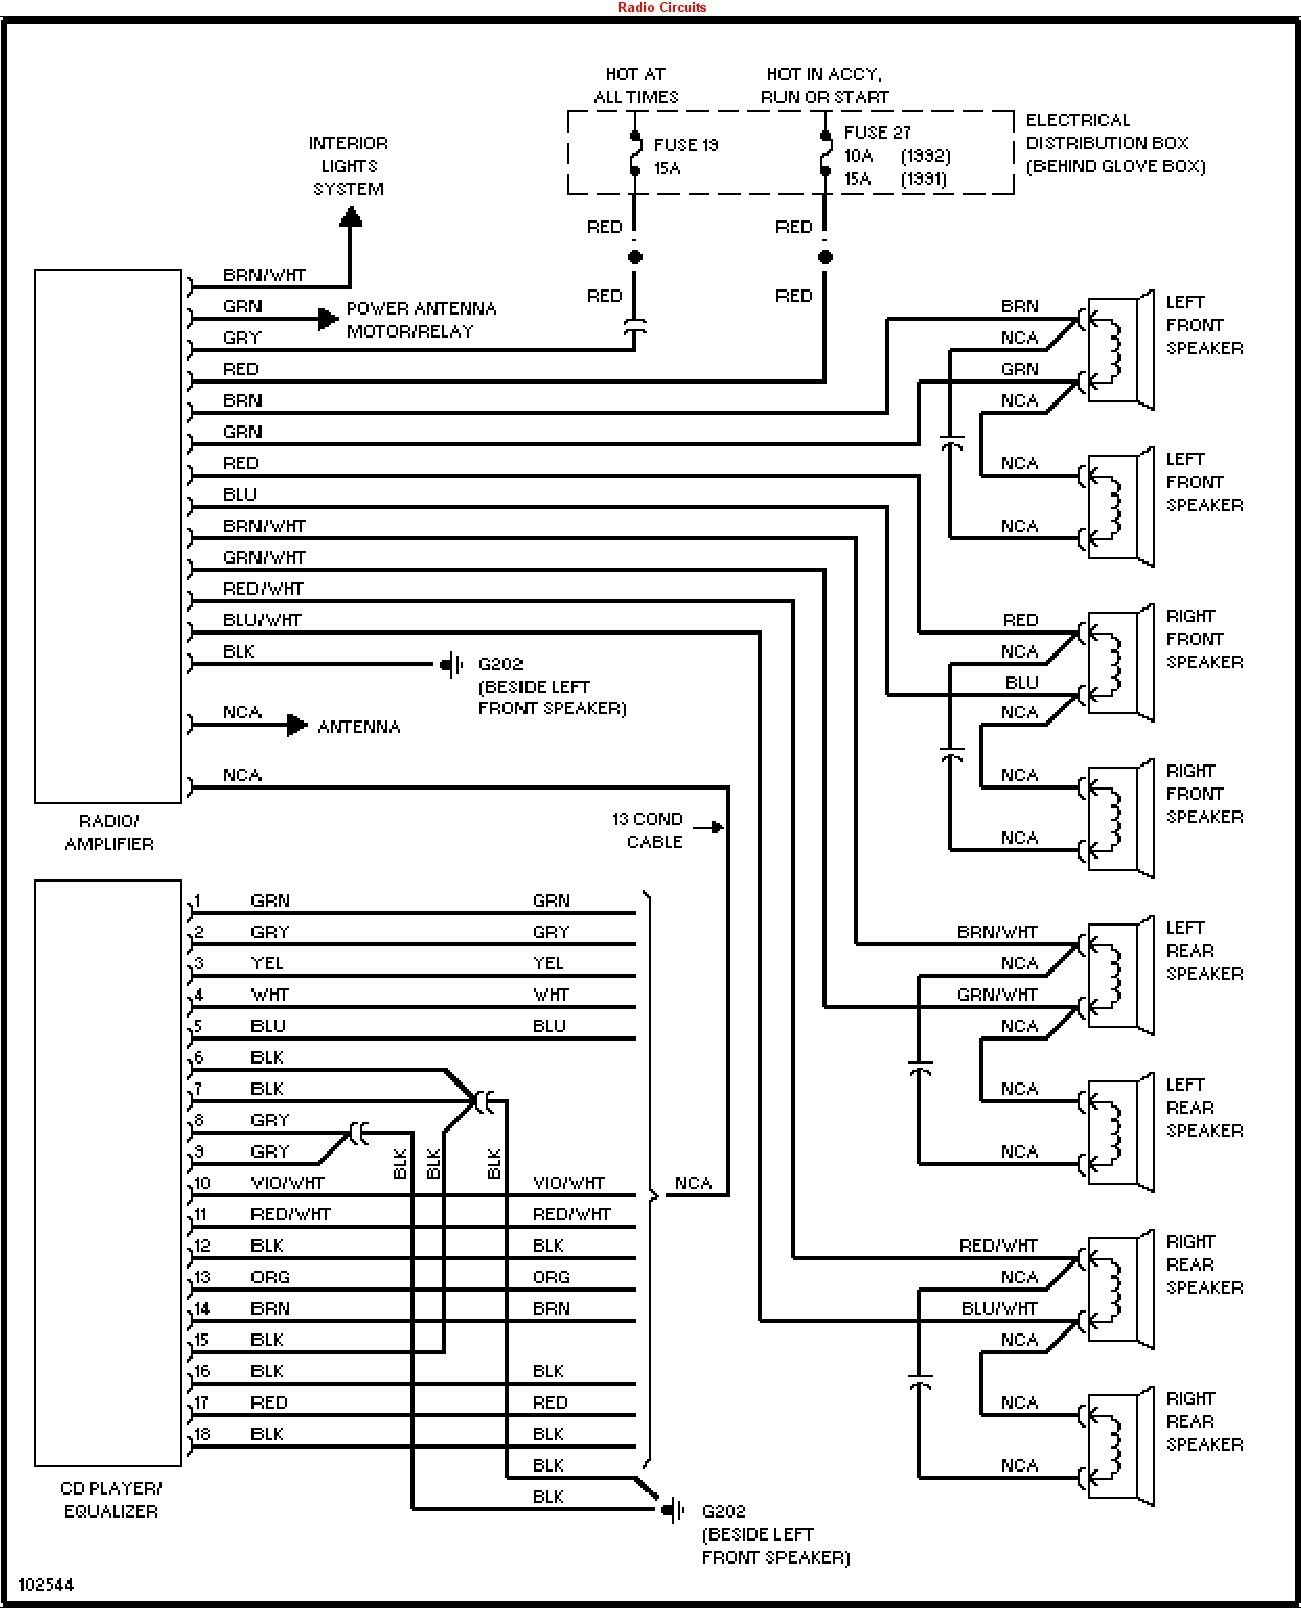 New Stereo Wiring Diagram